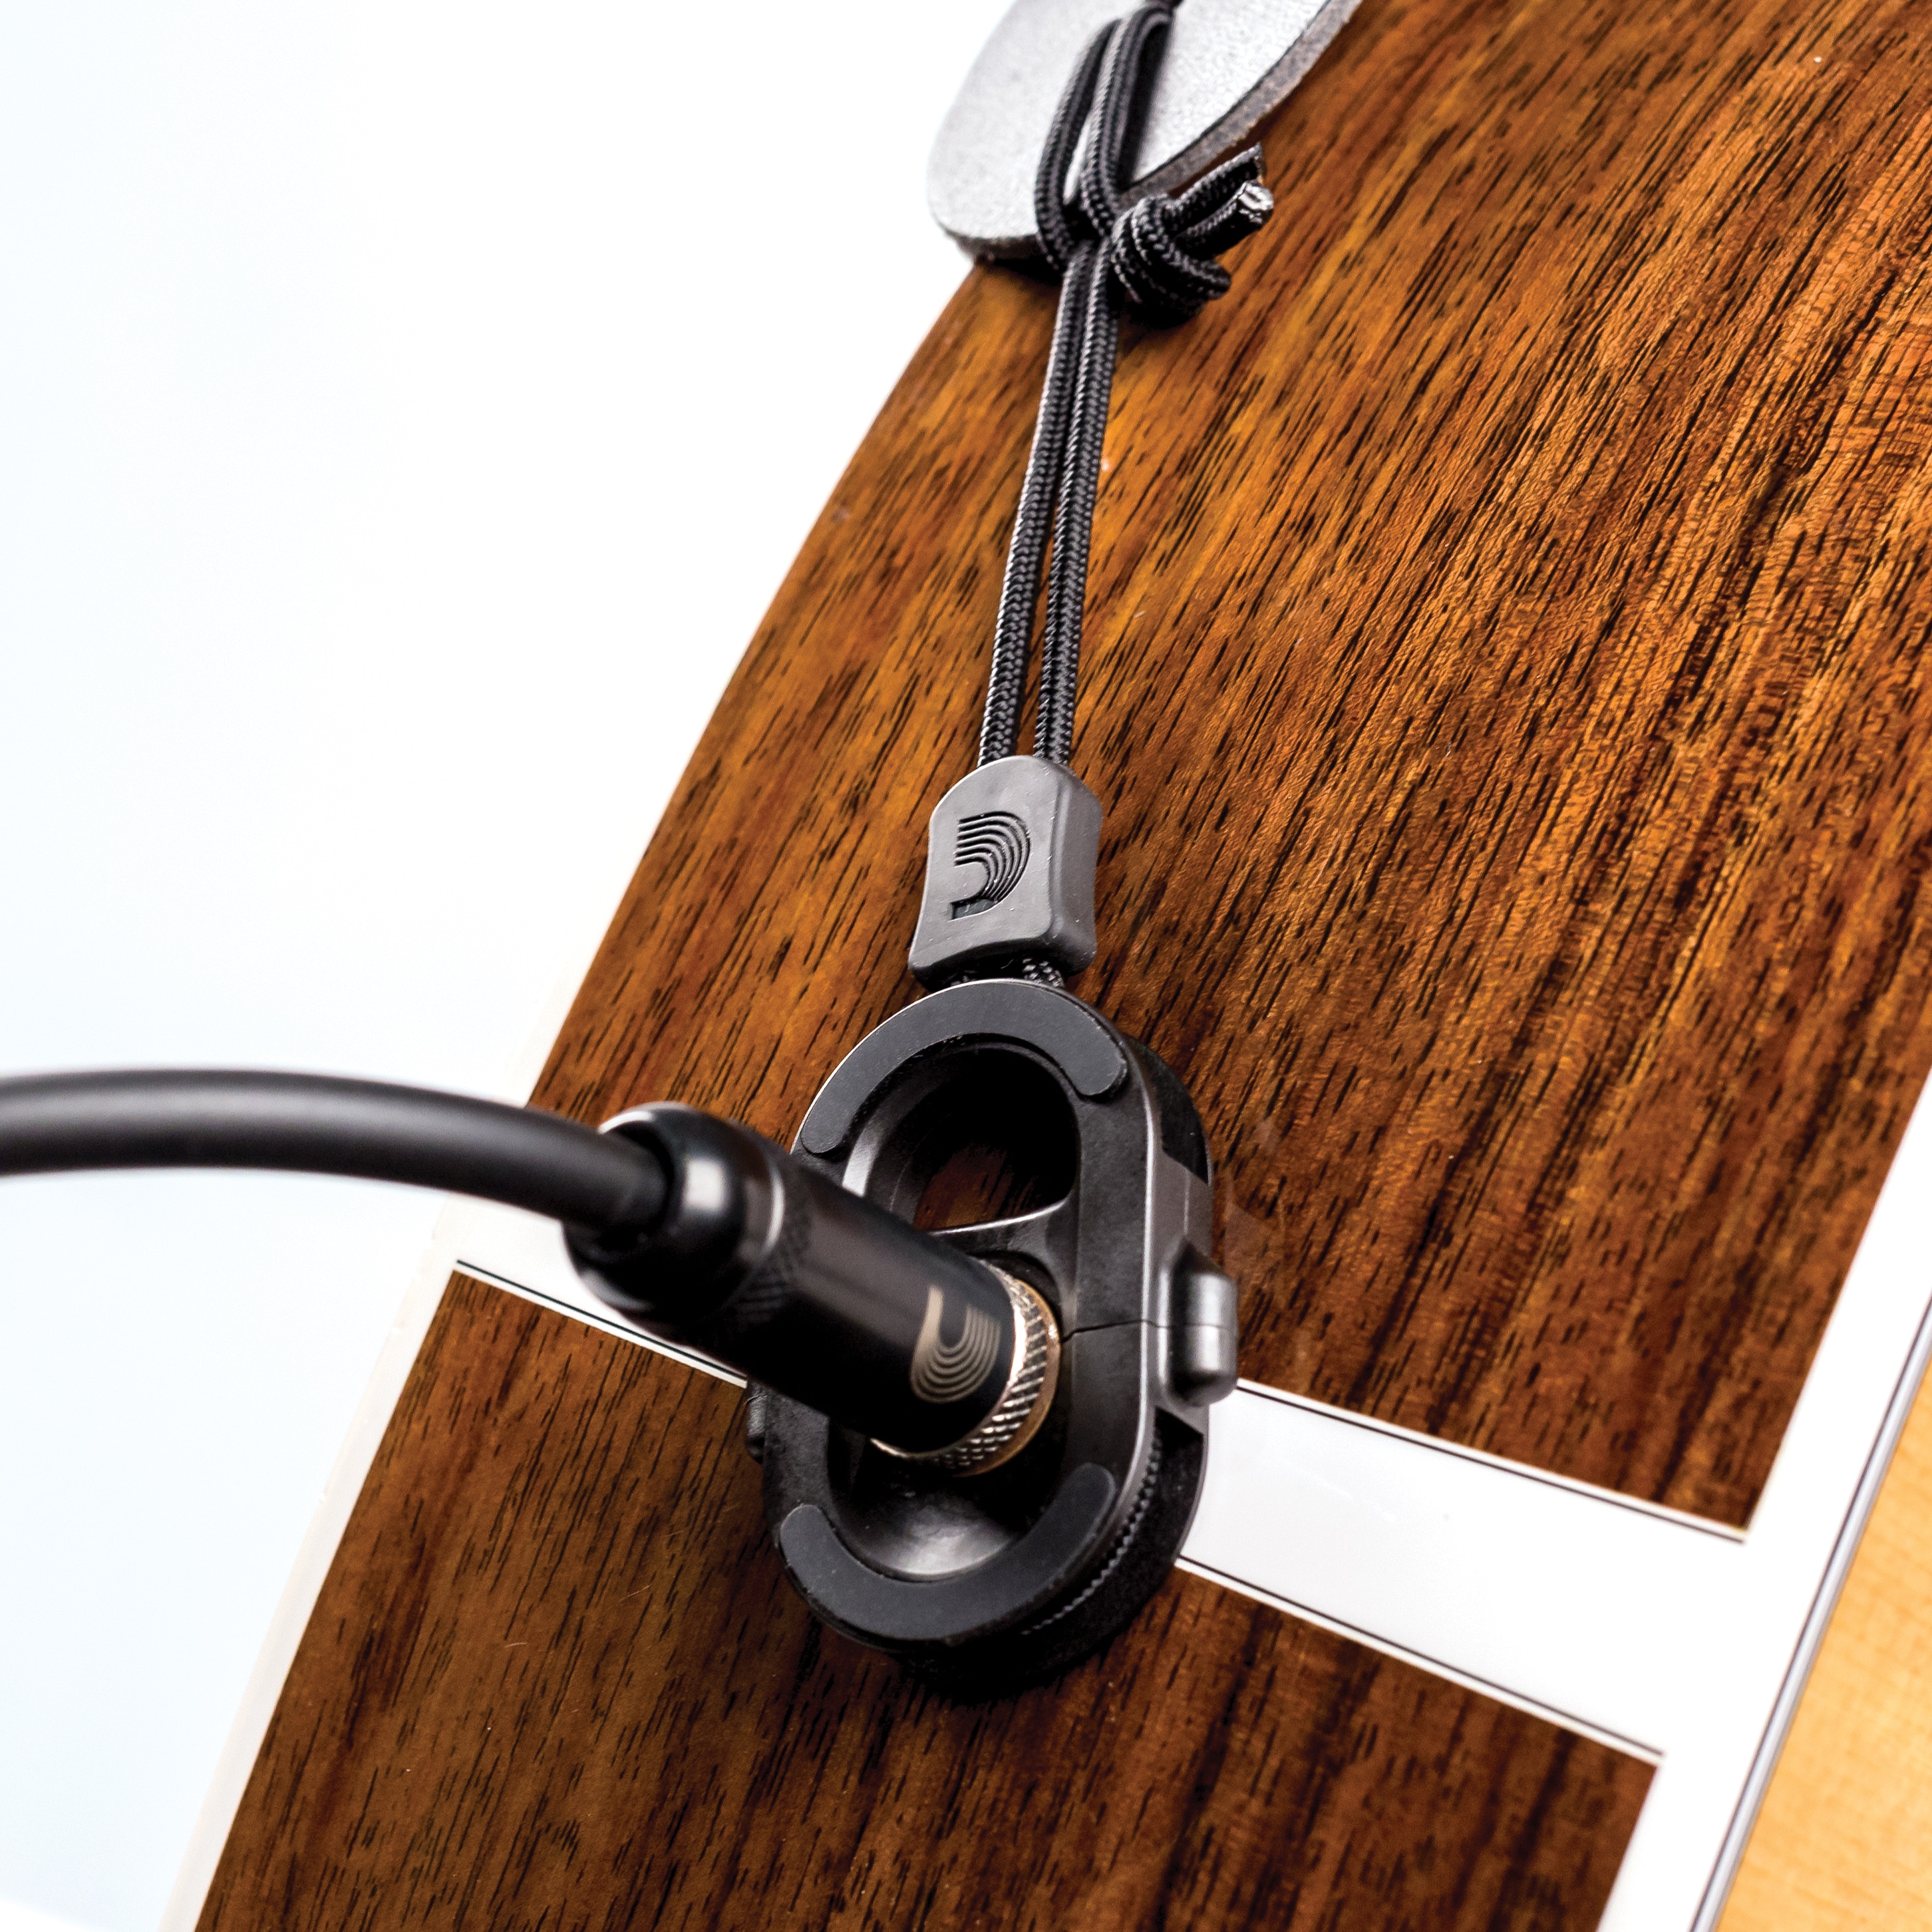 D’Addario Accessories Launches Several New Products